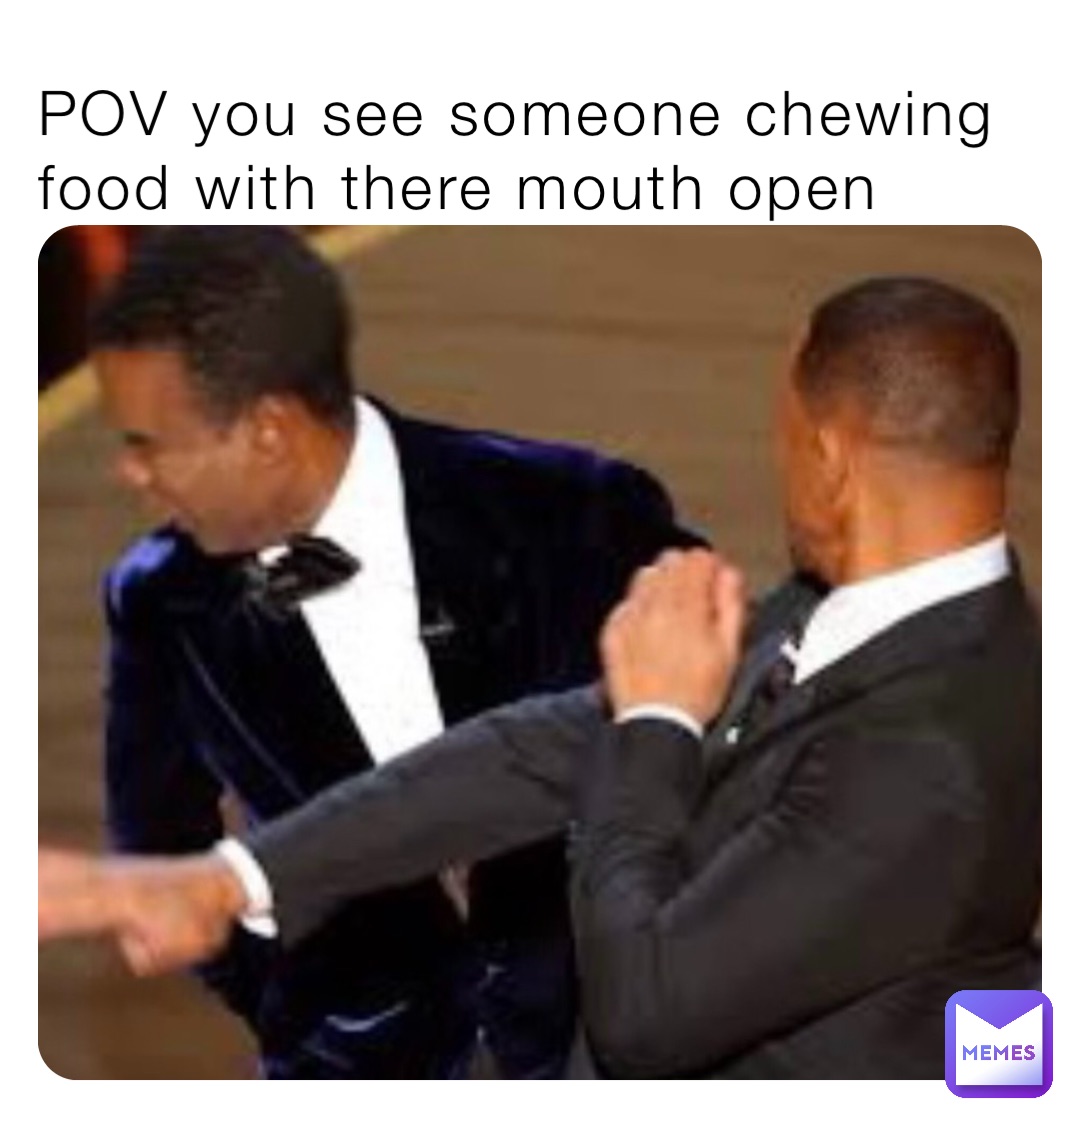 POV you see someone chewing food with there mouth open